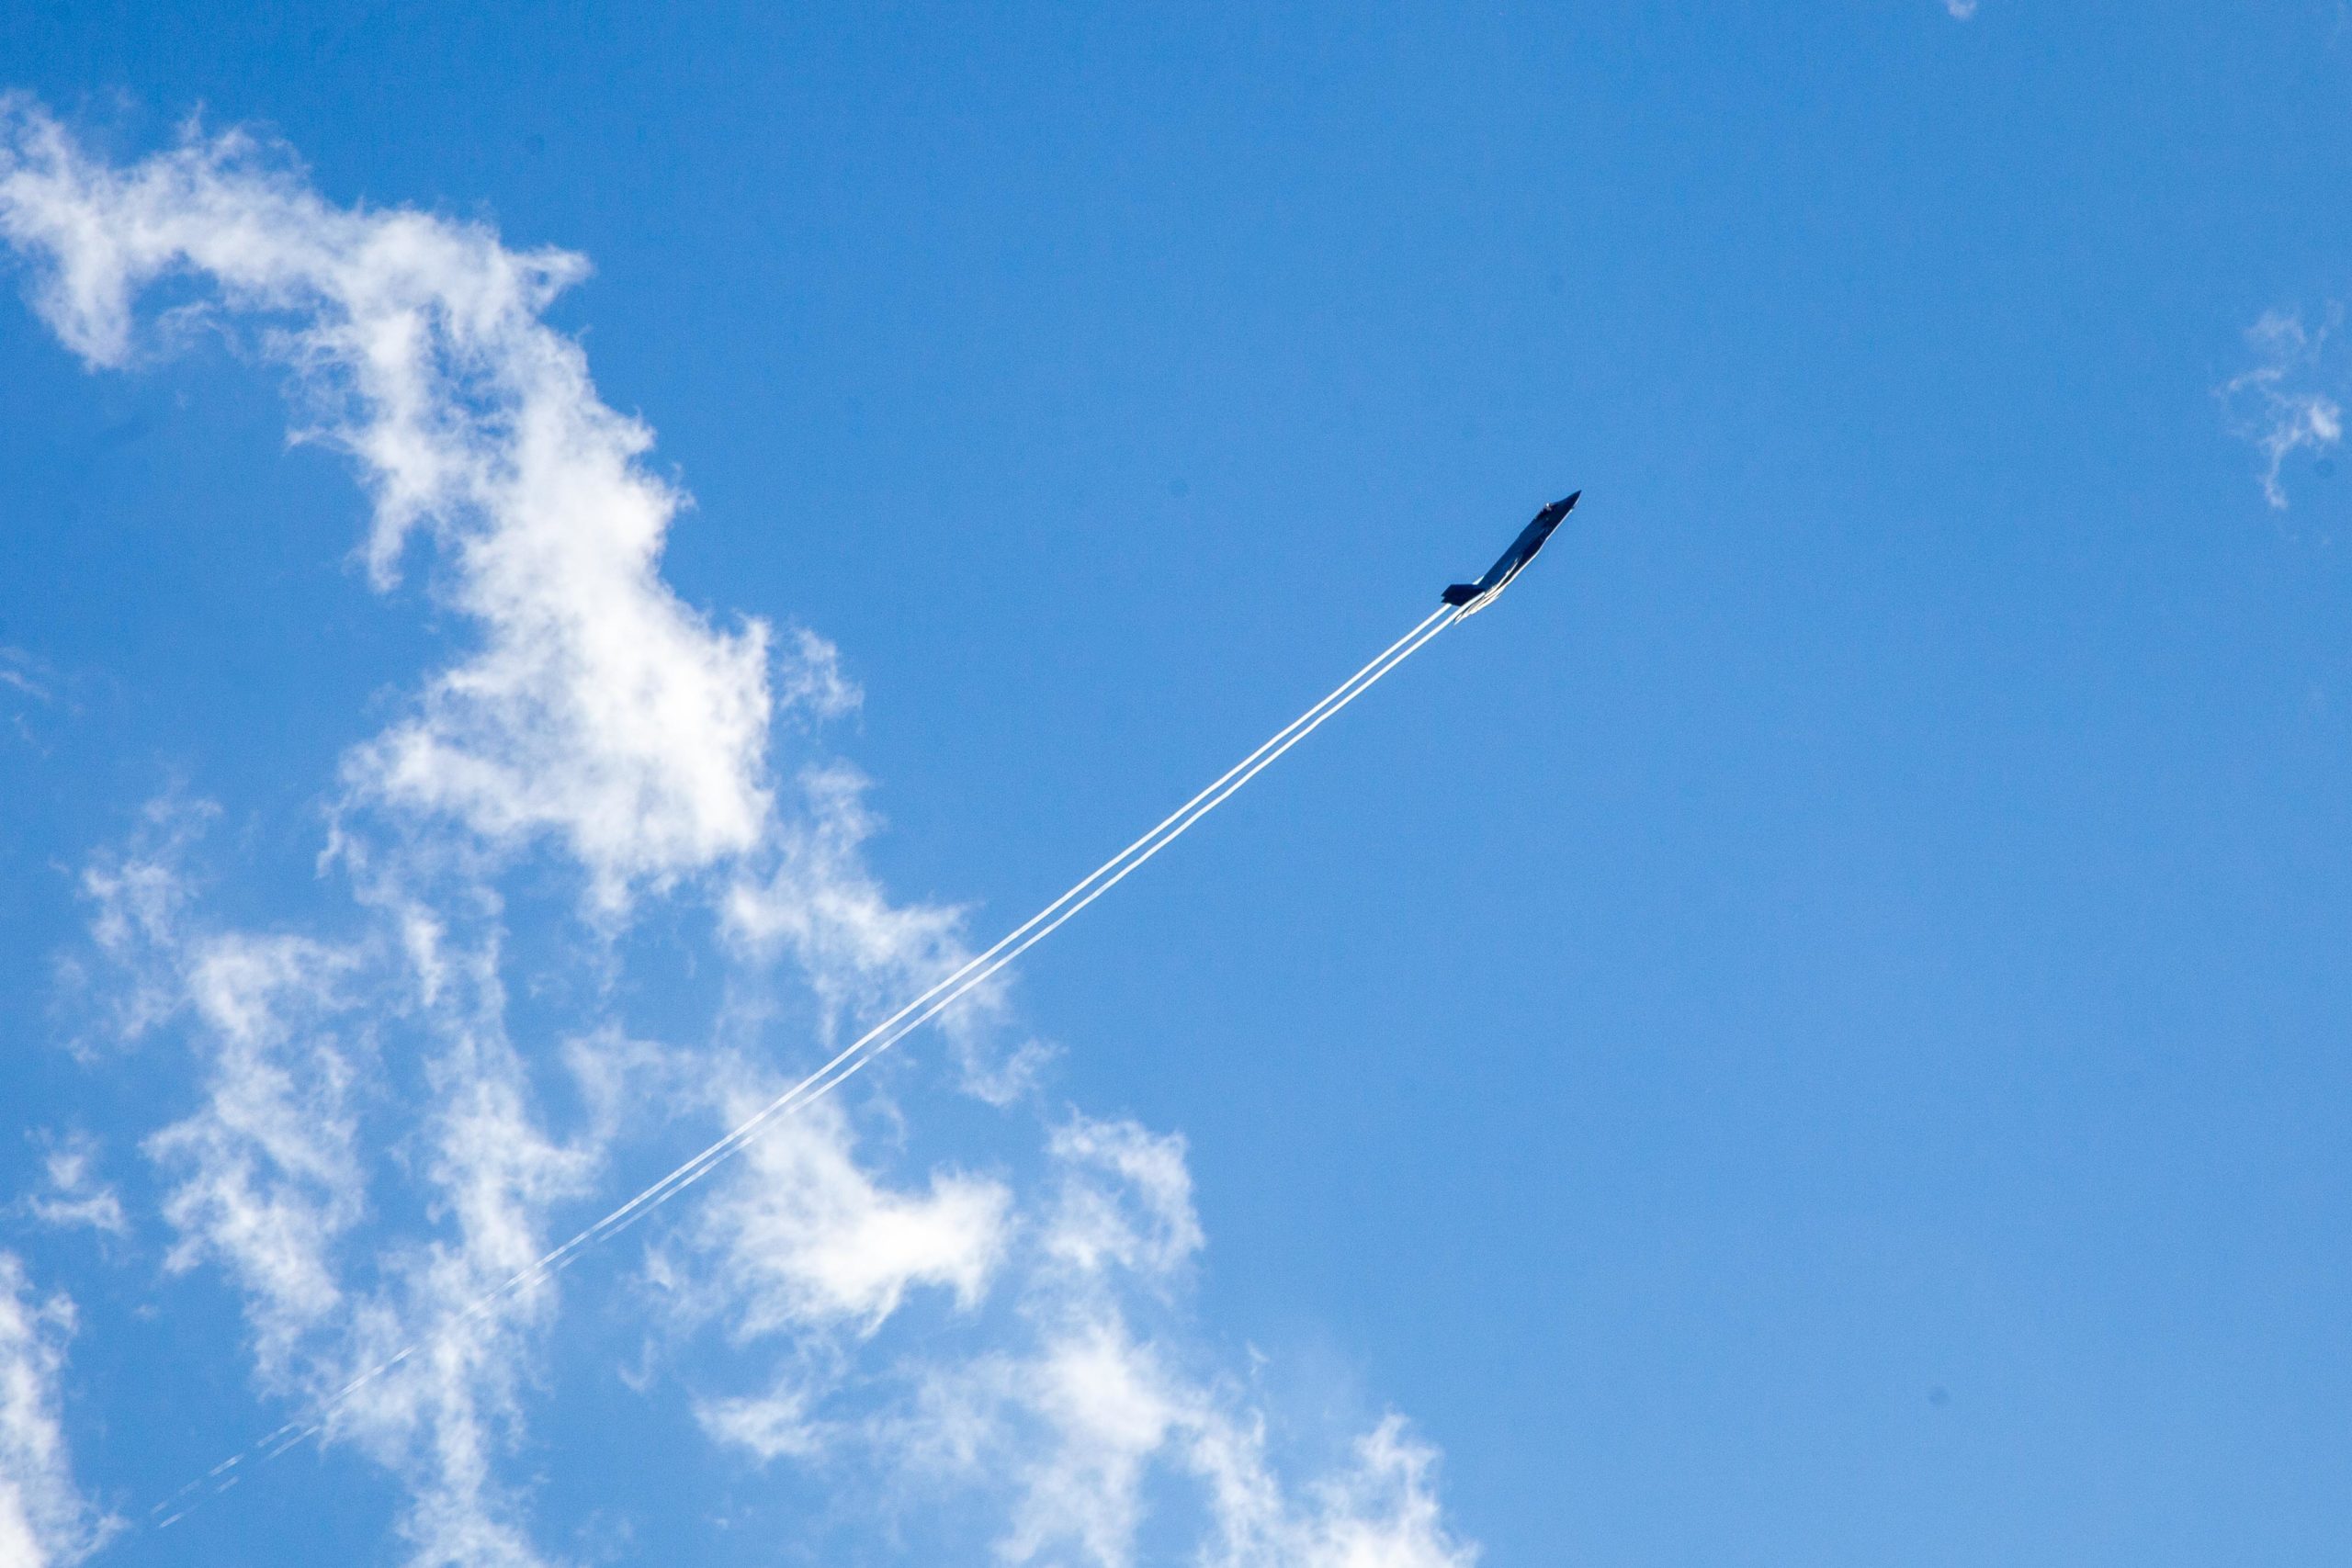 F-35 fighter jet with contrails